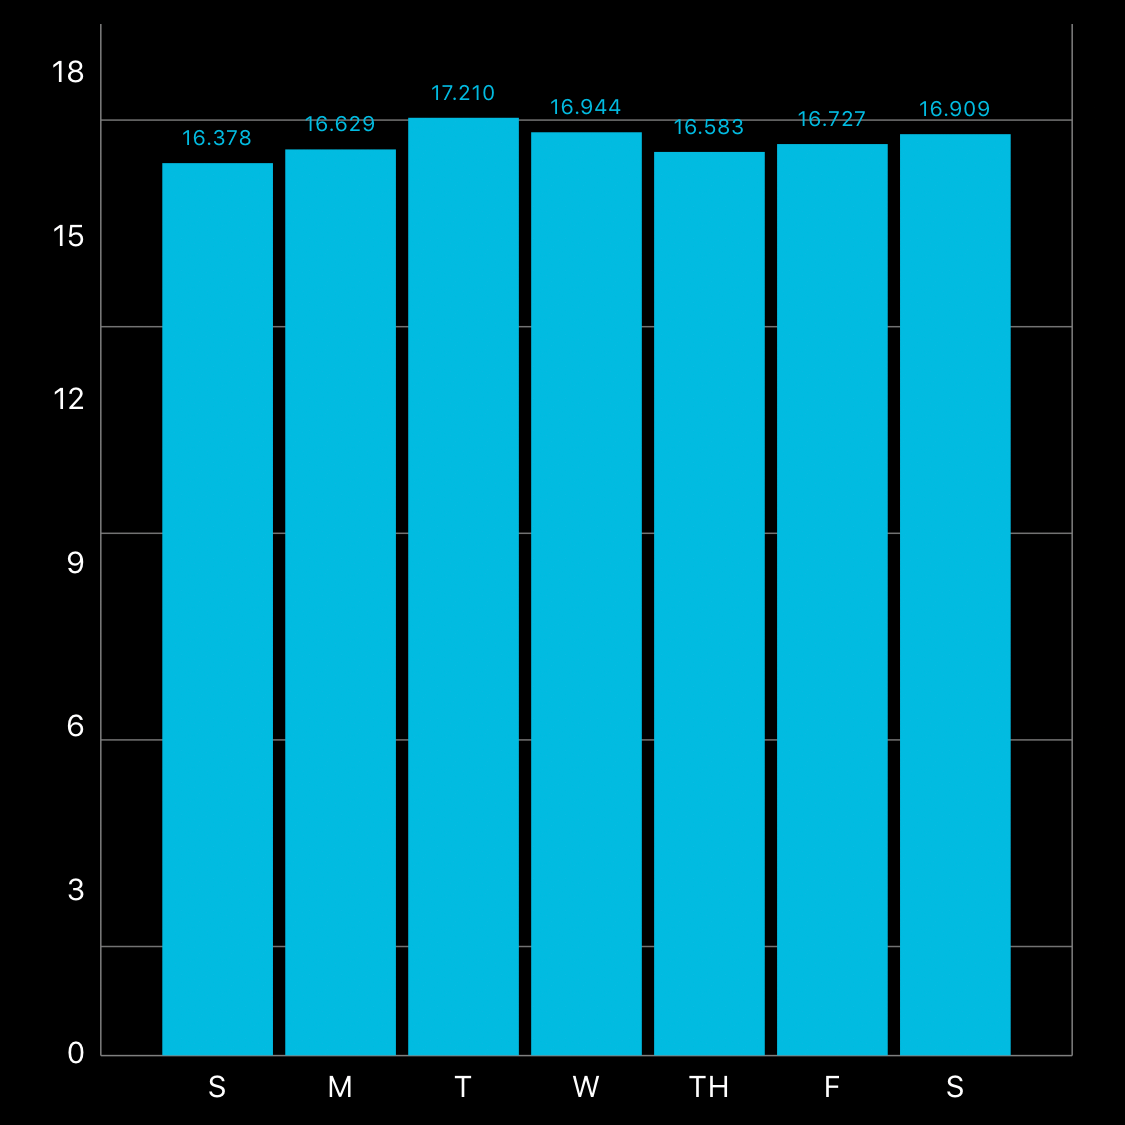 Stand hours chart data average throughout the week